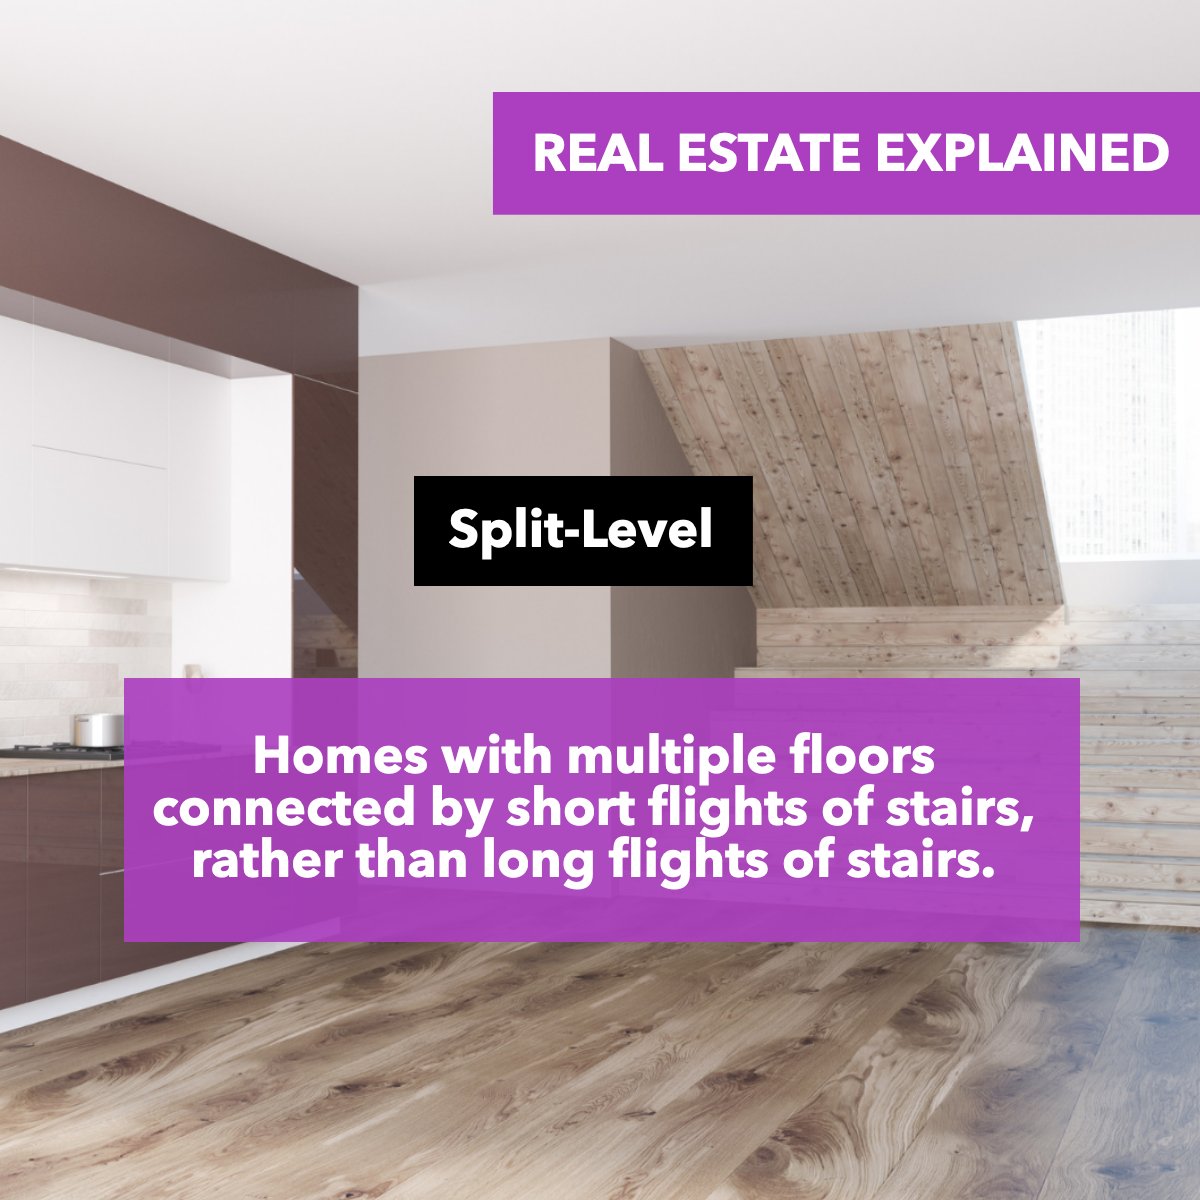 Did you know what a Spit-Level is 🤔

Is this the type of house that you like

#splitlevelremodel #splitlevelhome #splitleveldesign